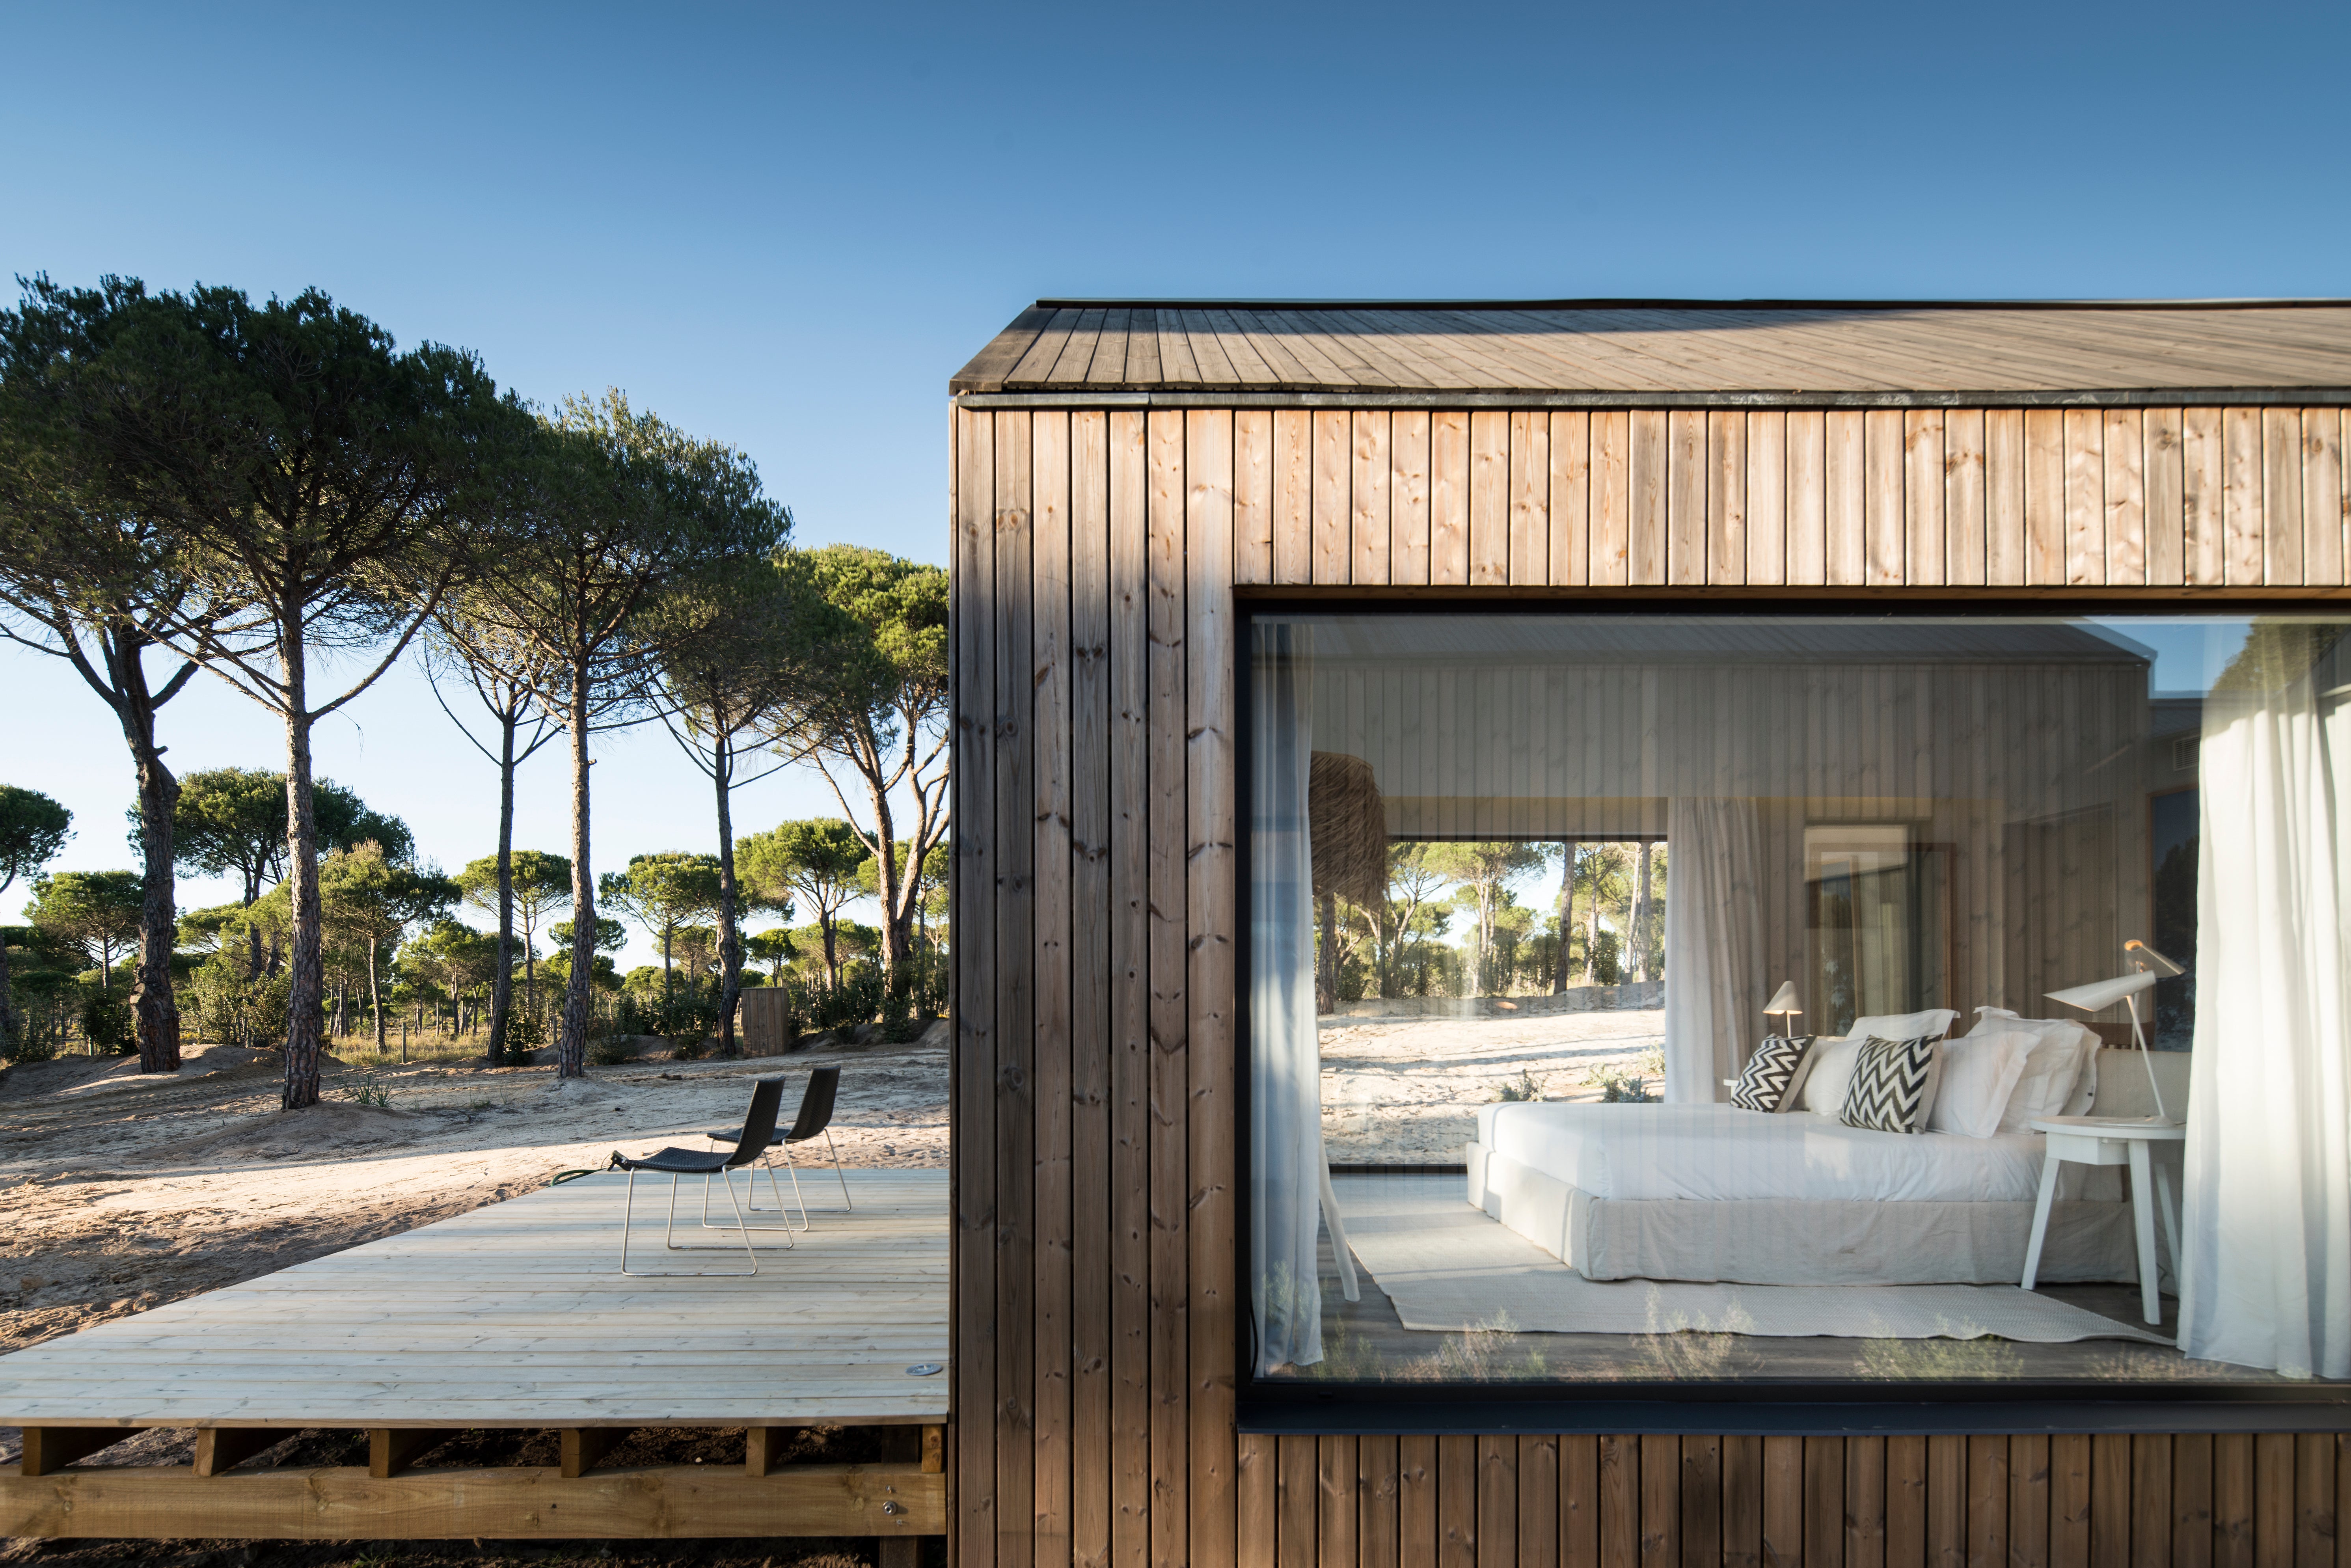 Sublime Comporta has chic suites and large windows filled with natural beauty